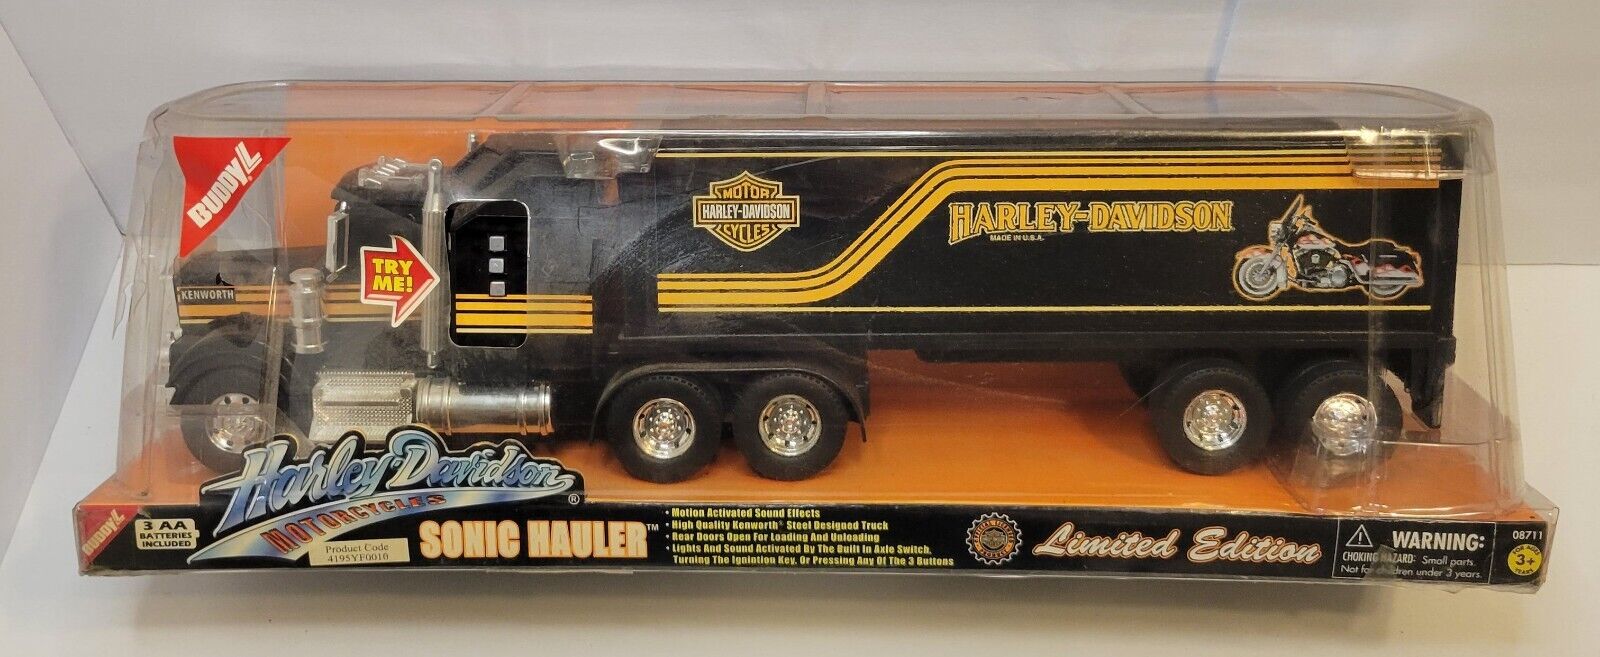 Limited Edition Harley Davidson Sonic Hauler Truck By Buddly L New In Package 